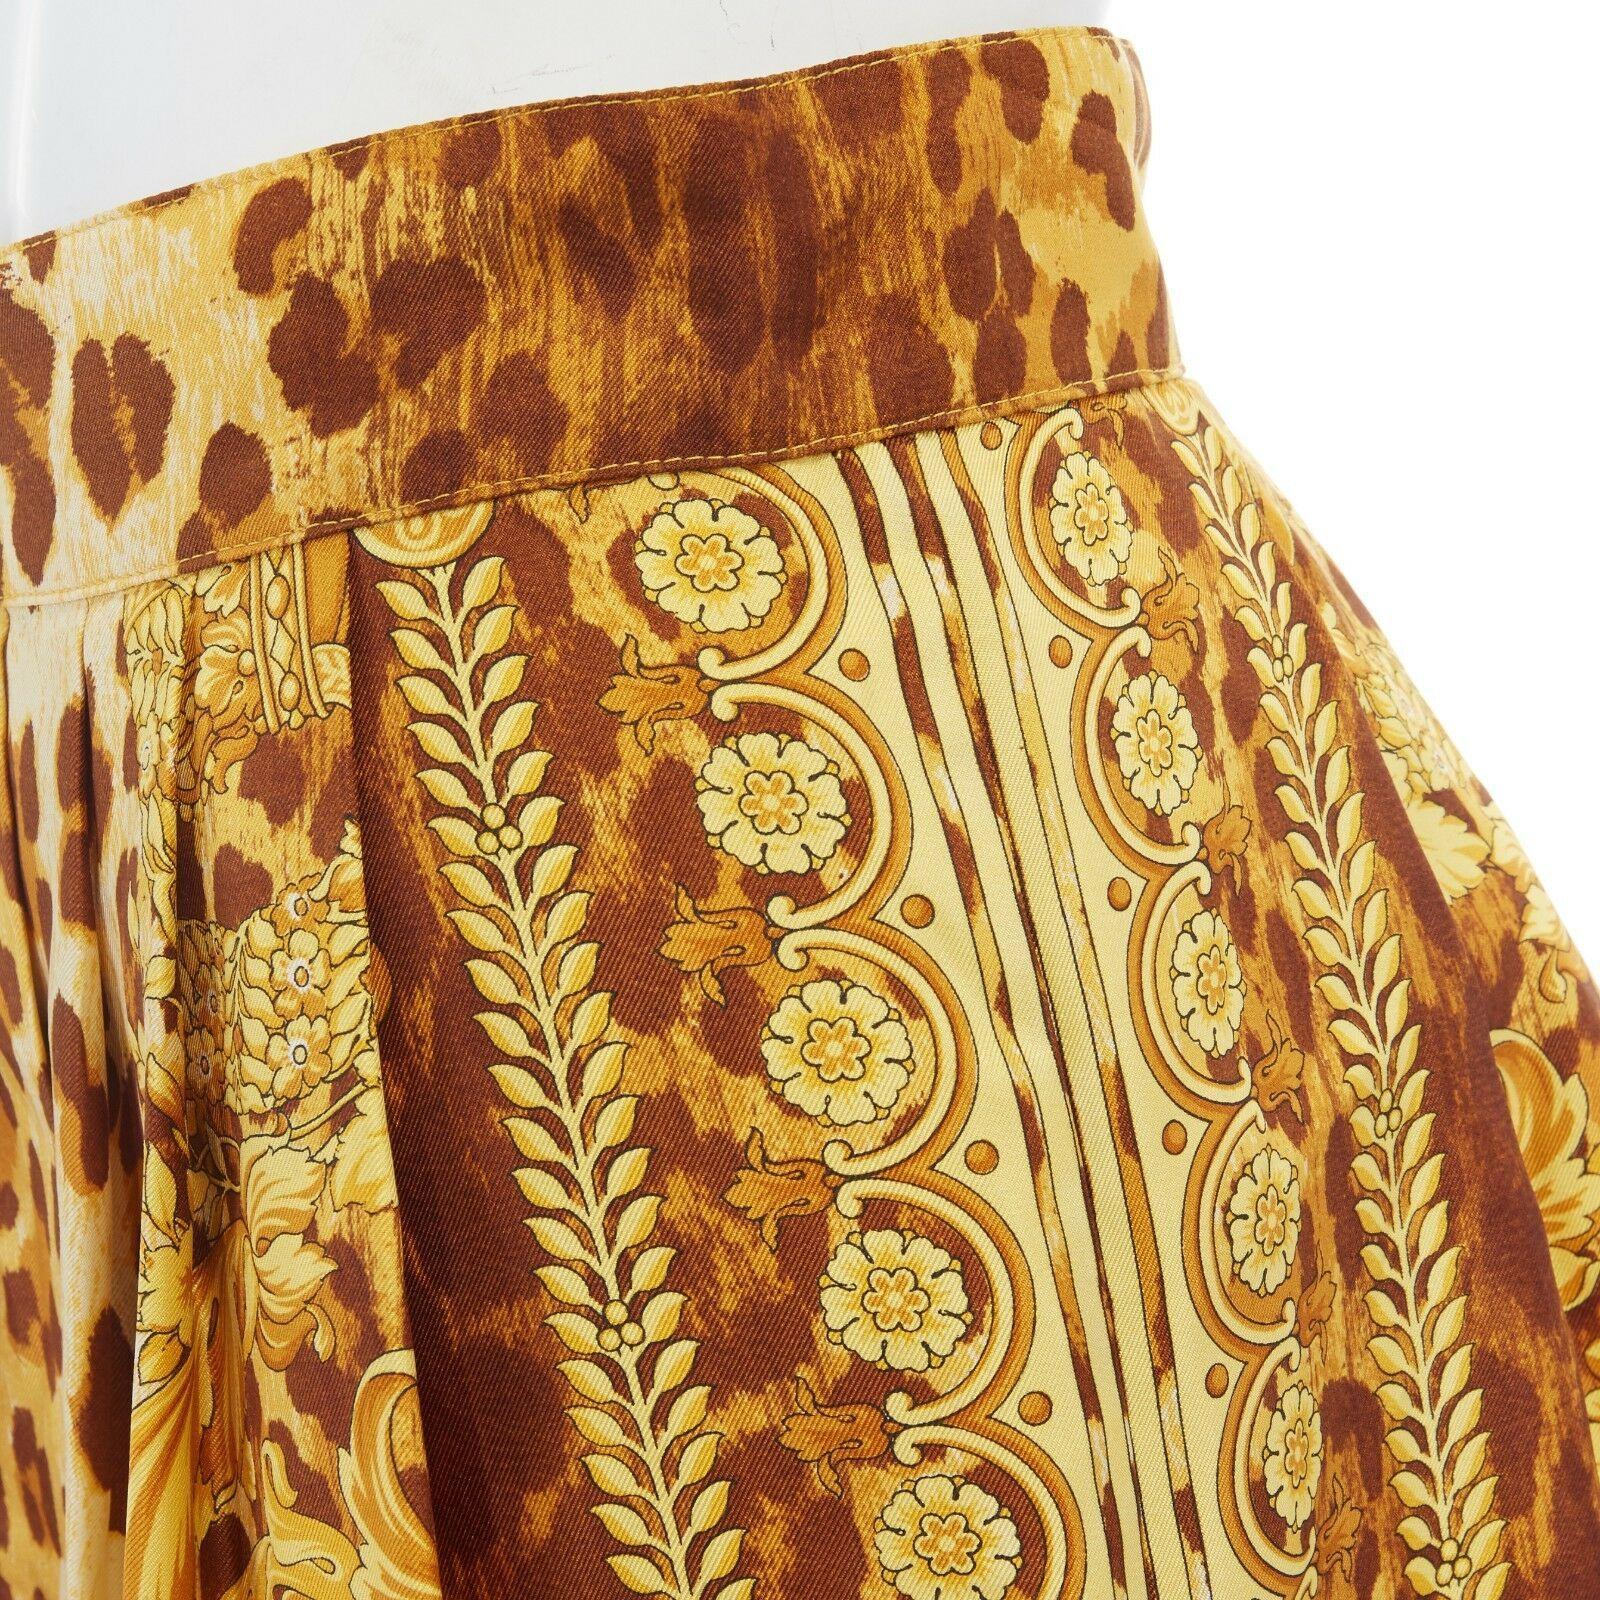 GIANNI VERSACE brown leopard gold baroque rococo print flared mini skirt IT42 M
GIANNI VERSACE VINTAGE
100% silk. 
Brown leopard base. 
Gold baroque rococo crown print. 
Pleated skirt. 
Flat waistband. 
Concealed zip back closure. 
Flared skirt.